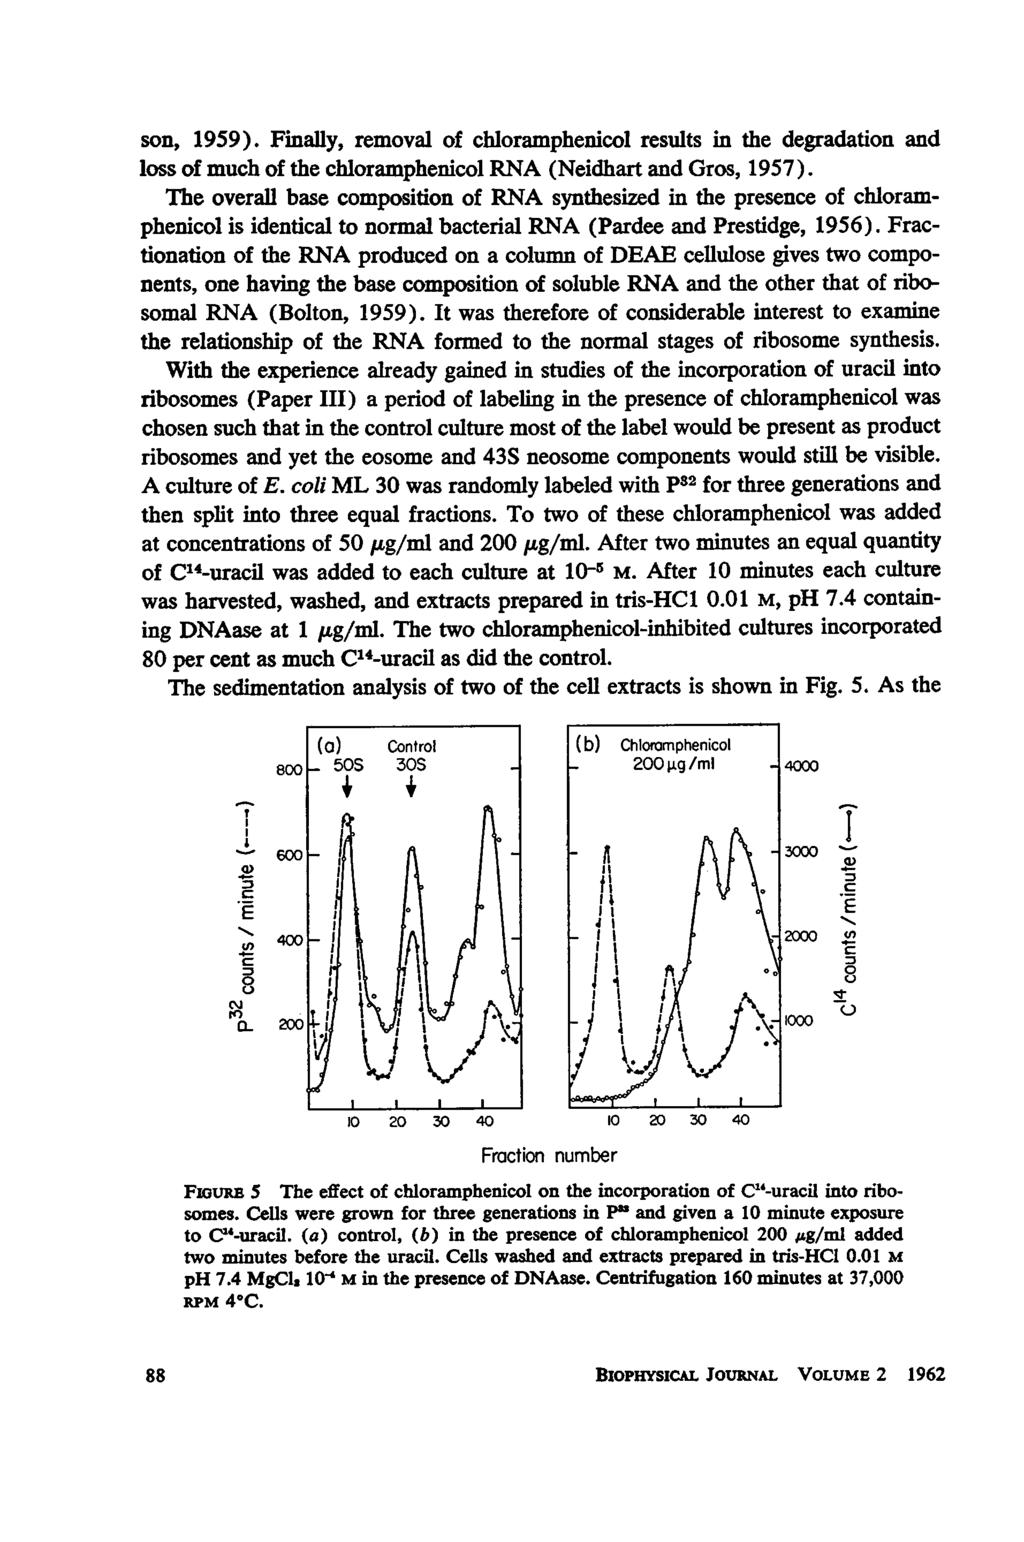 son, 1959). Finally, removal of chloramphenicol results in the degradation and loss of much of the chloramphenicol RNA (Neidhart and Gros, 1957).